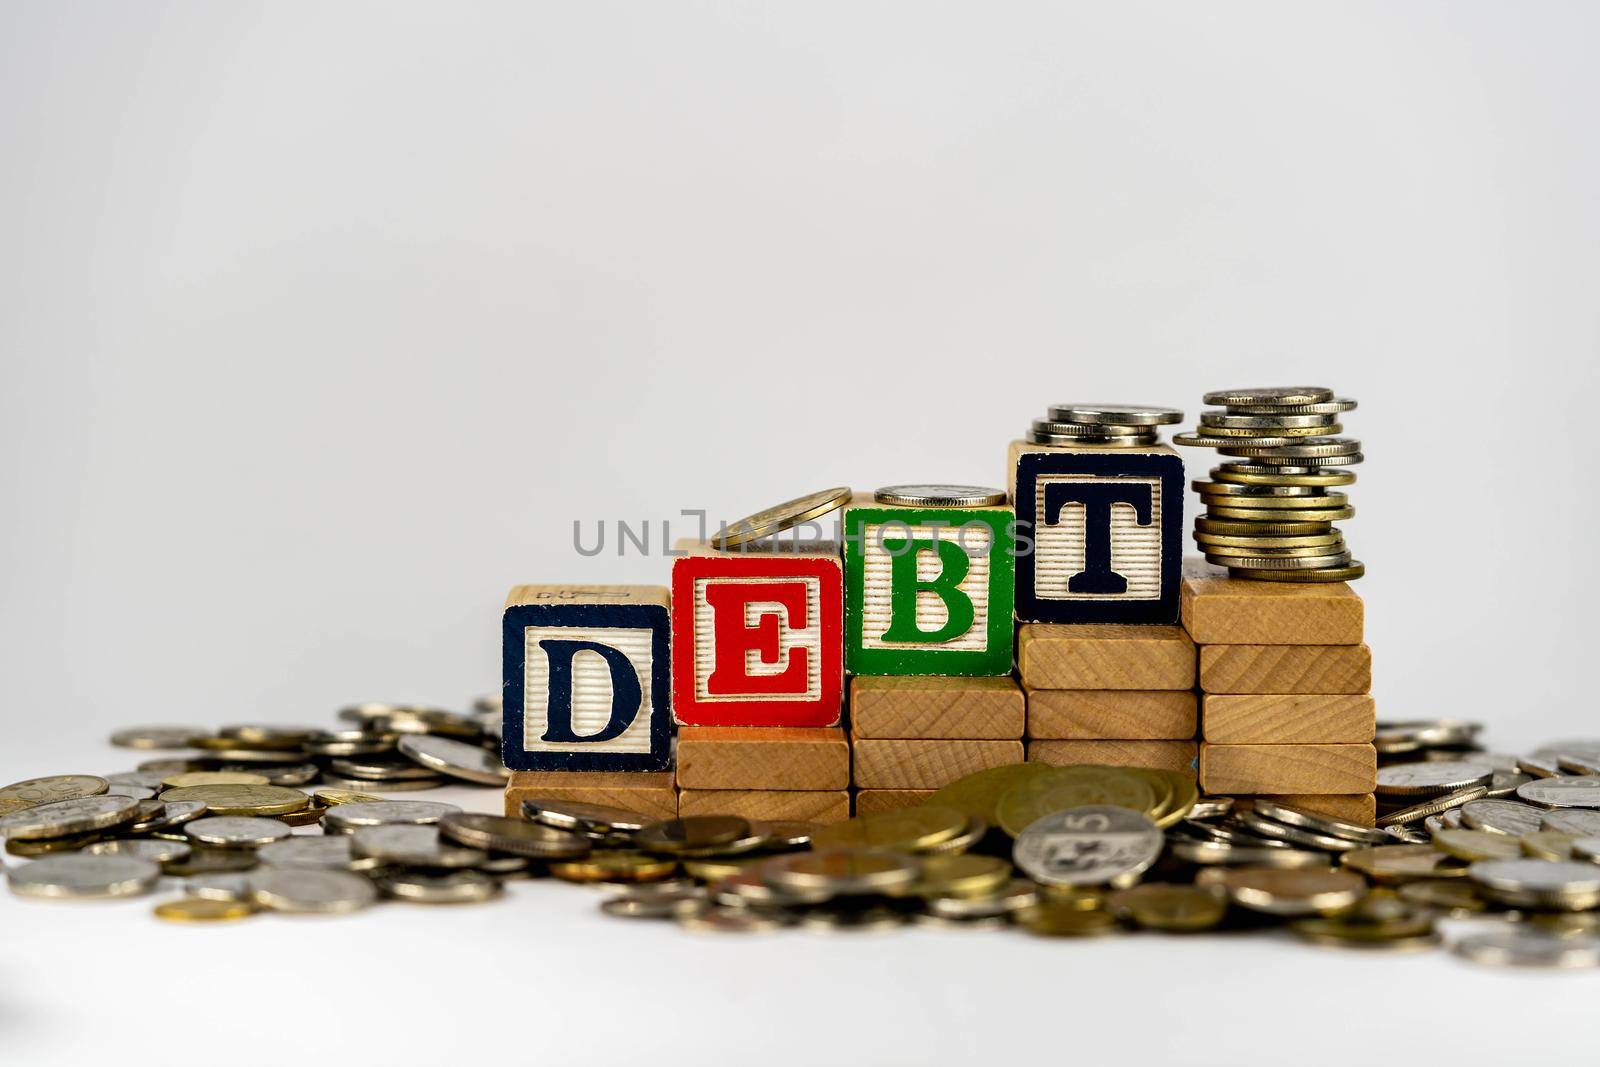 Debt concept with wooden blocks and coins. Debt letters on wooden blocks sorrounded with money